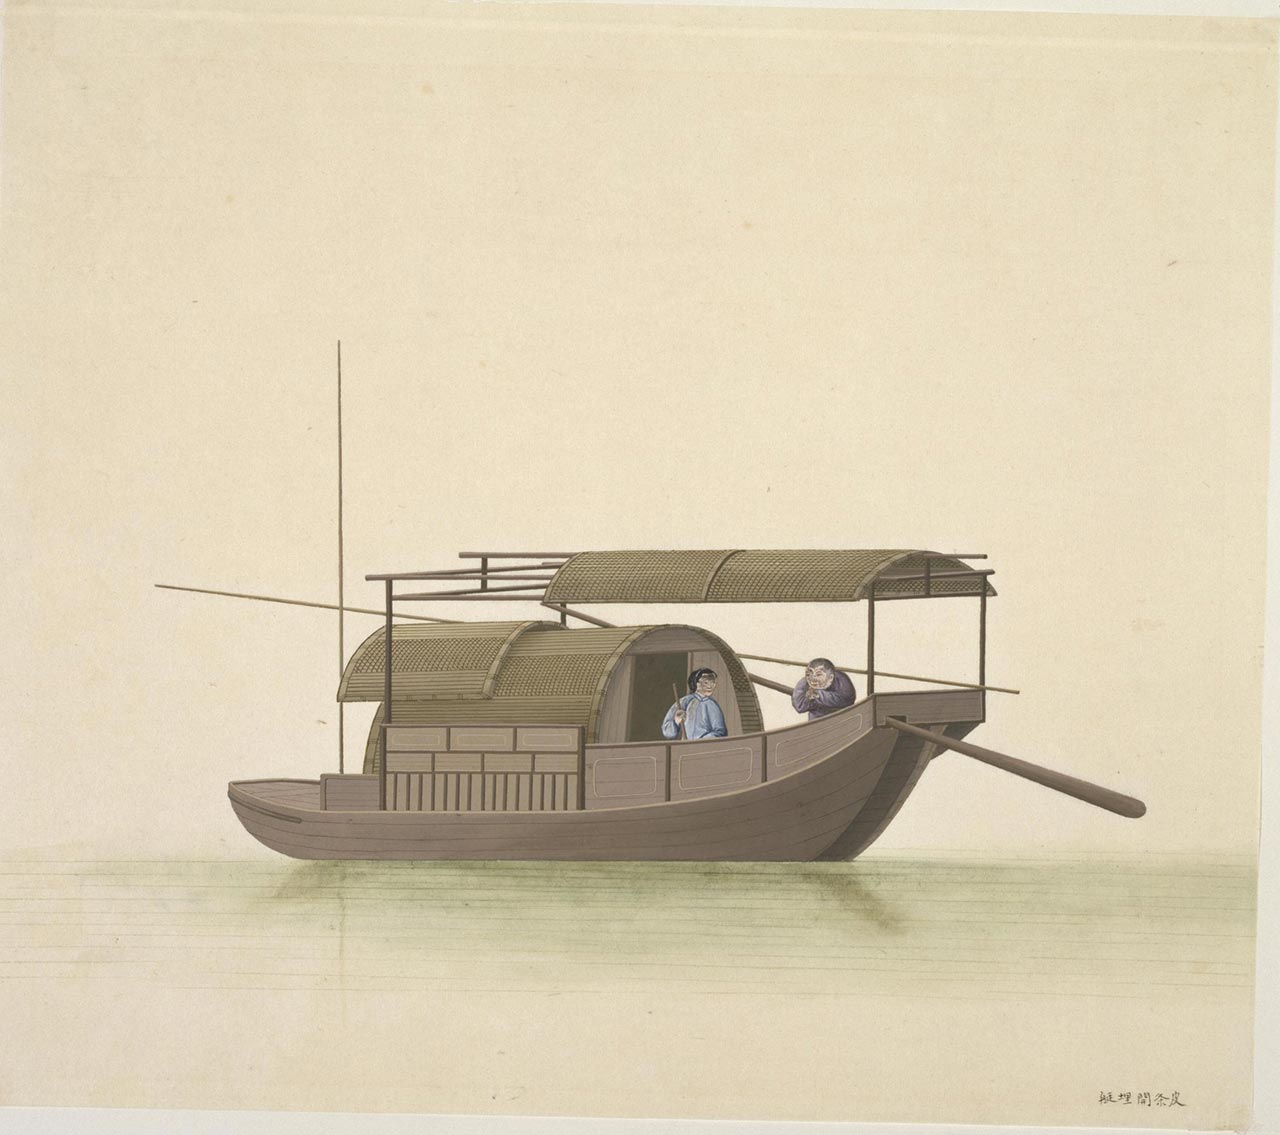 A pimp's boat, used to ferry clients from the shore to the prostitute's boat which remained stationary on the river.